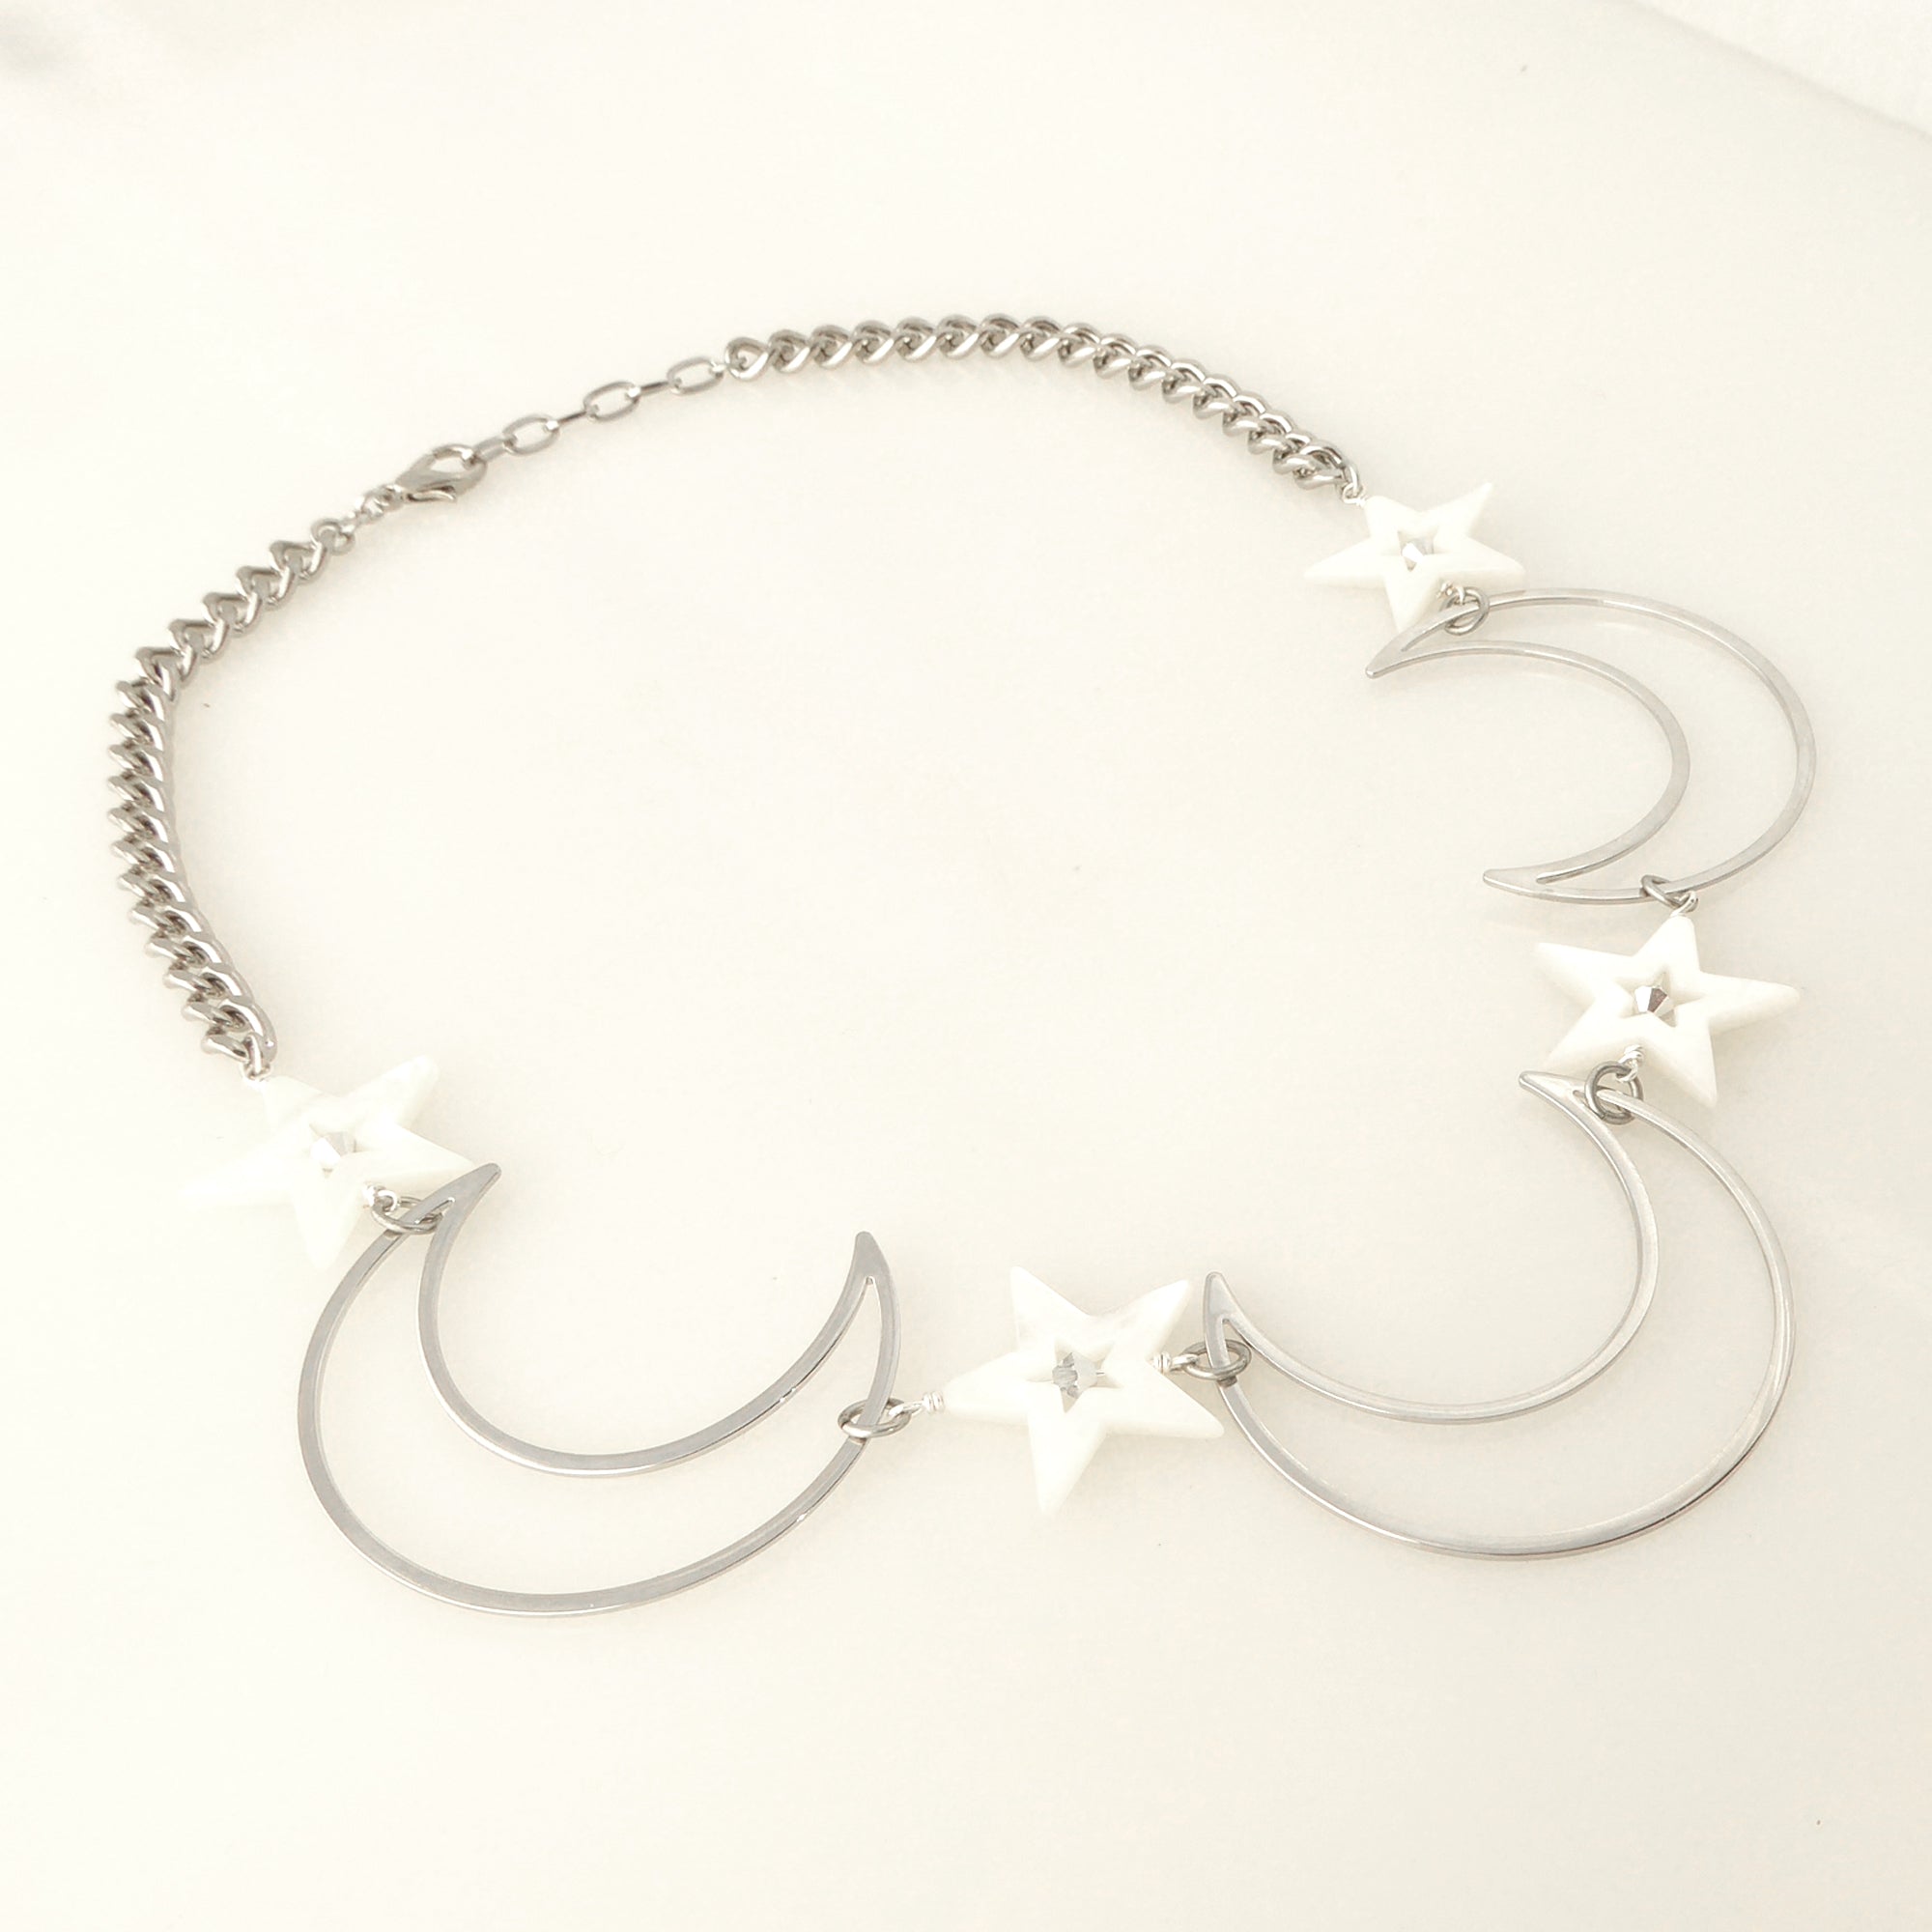 Silver crescent moon necklace by Jenny Dayco 2